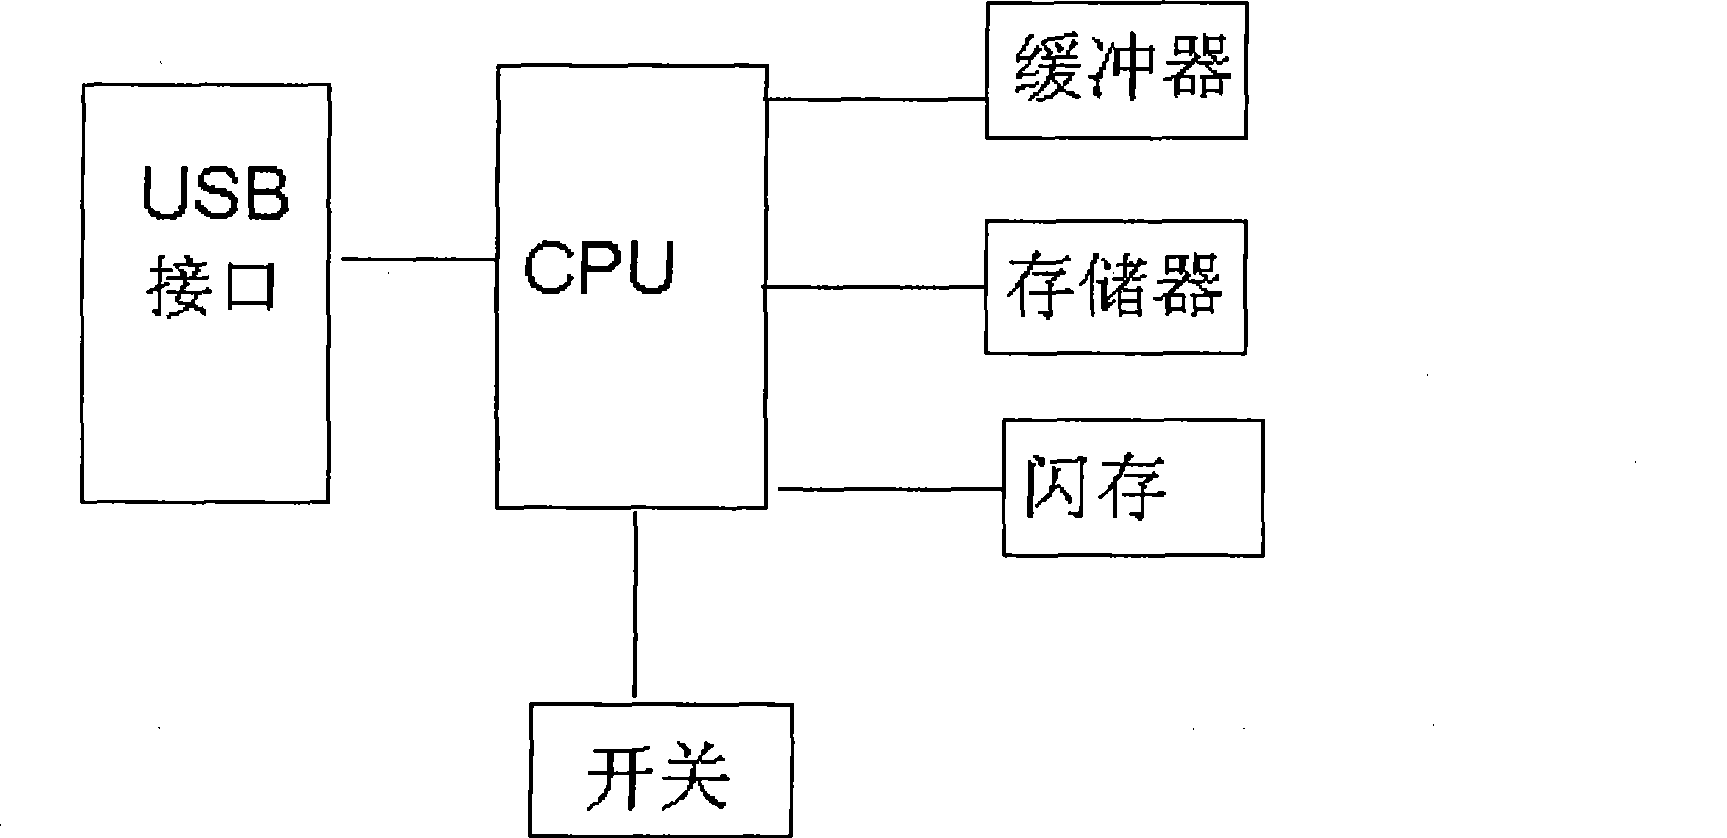 Intelligent identification exchange card with a display device